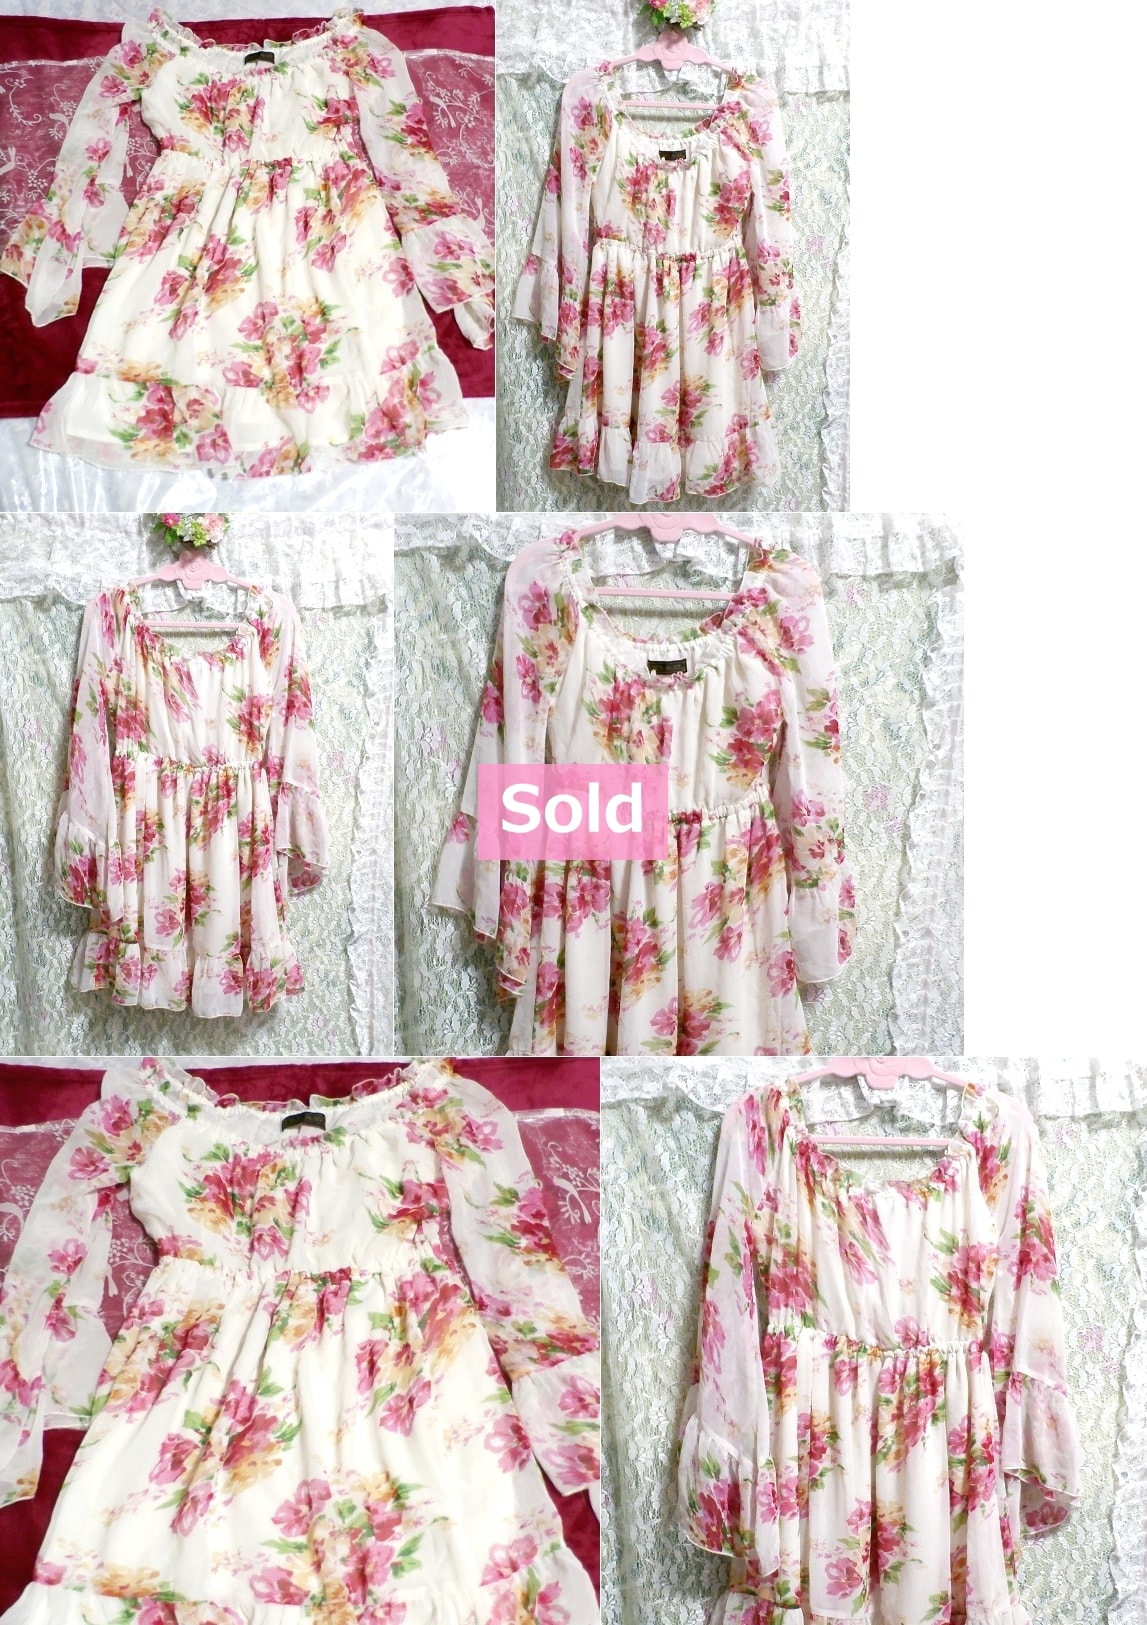 CECIL McBEE セシルマクビー白ピンク花柄シフォンチュニック/トップス/ワンピース White pink floral pattern chiffon tunic/tops/onepiece